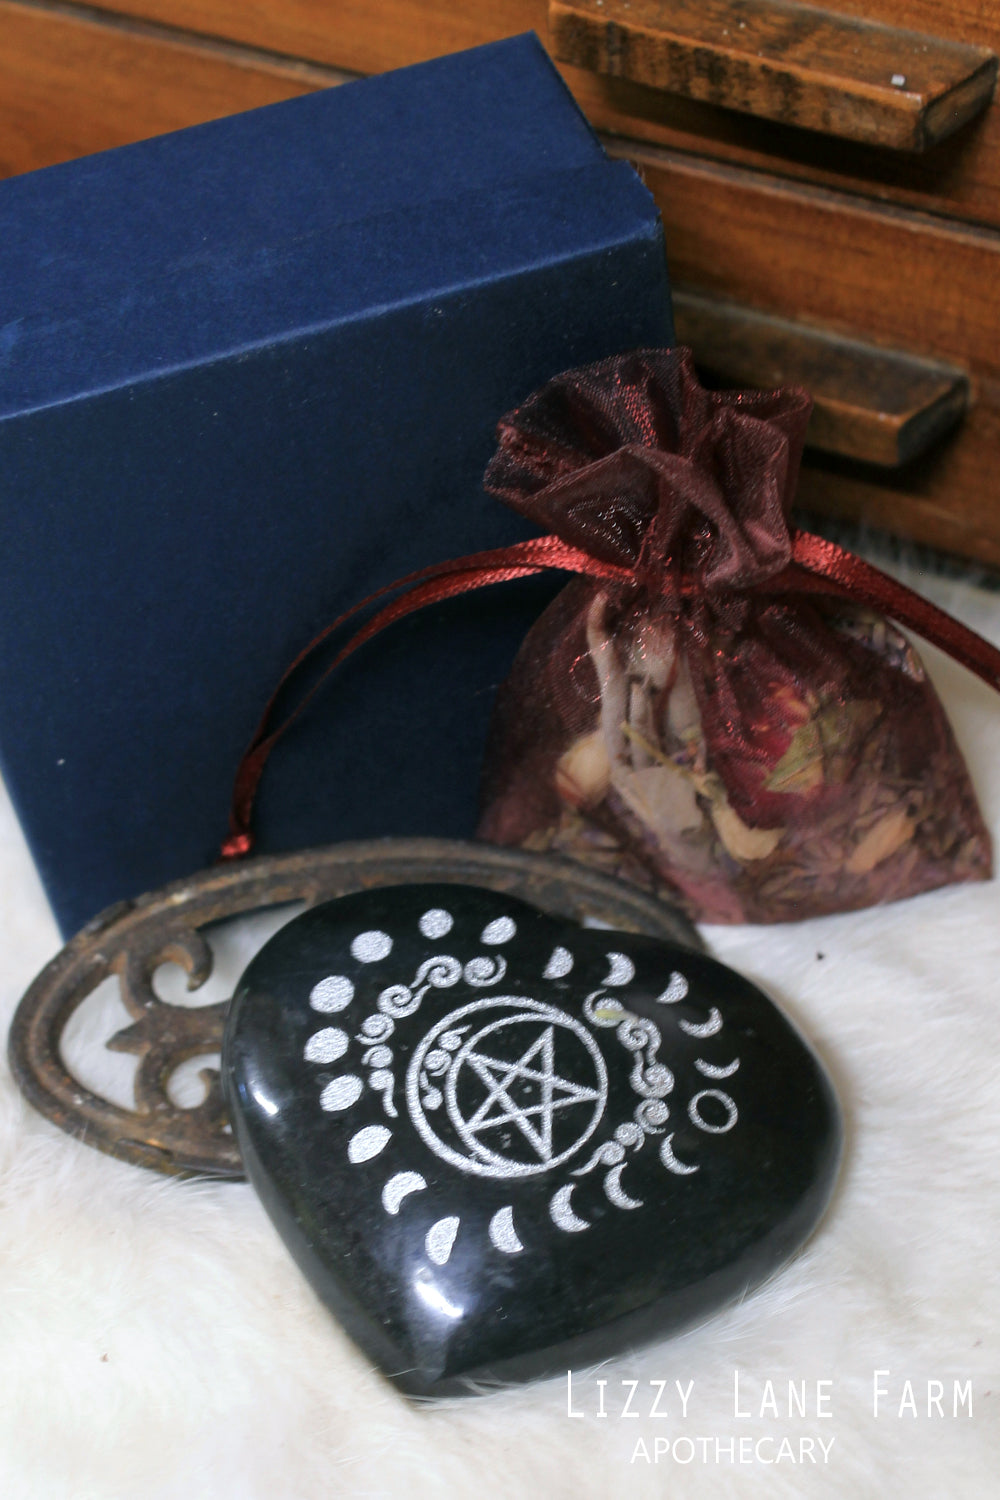 A beautifully polished Black Tourmaline stone heart with silver moon phases circling a pentacle.